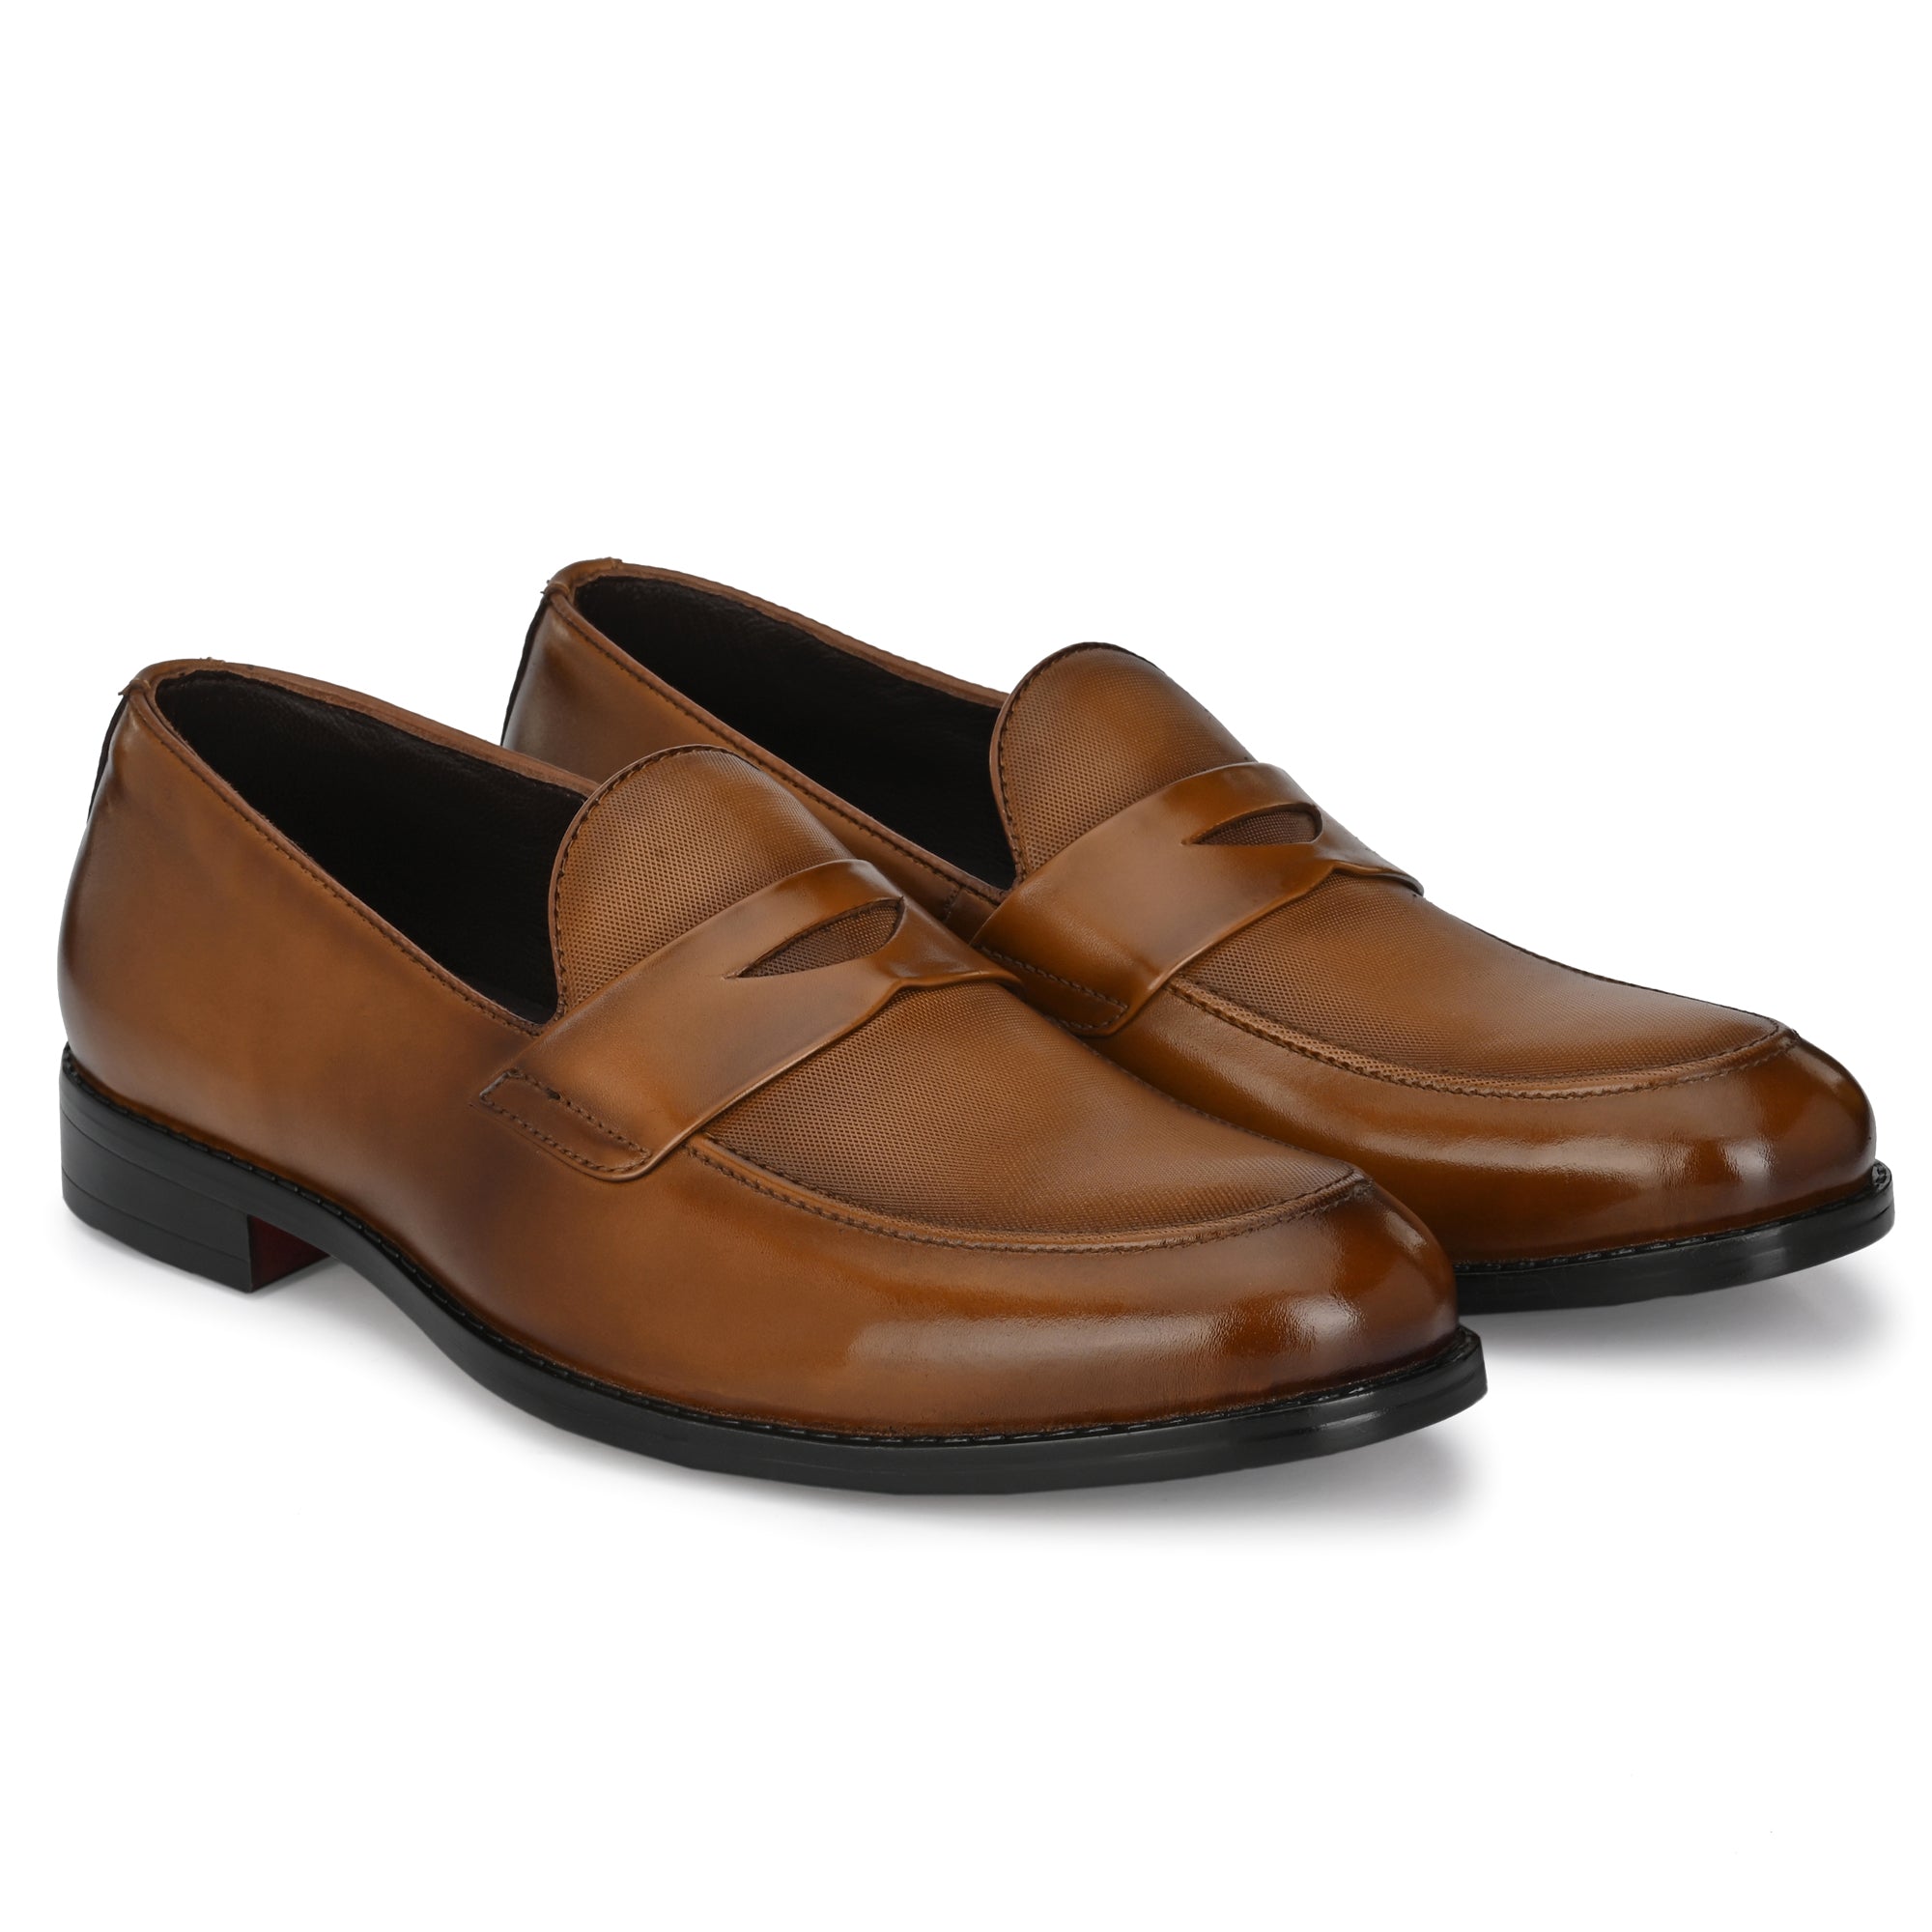 Egoss Formal Penny Loafers For Men with Textured Top